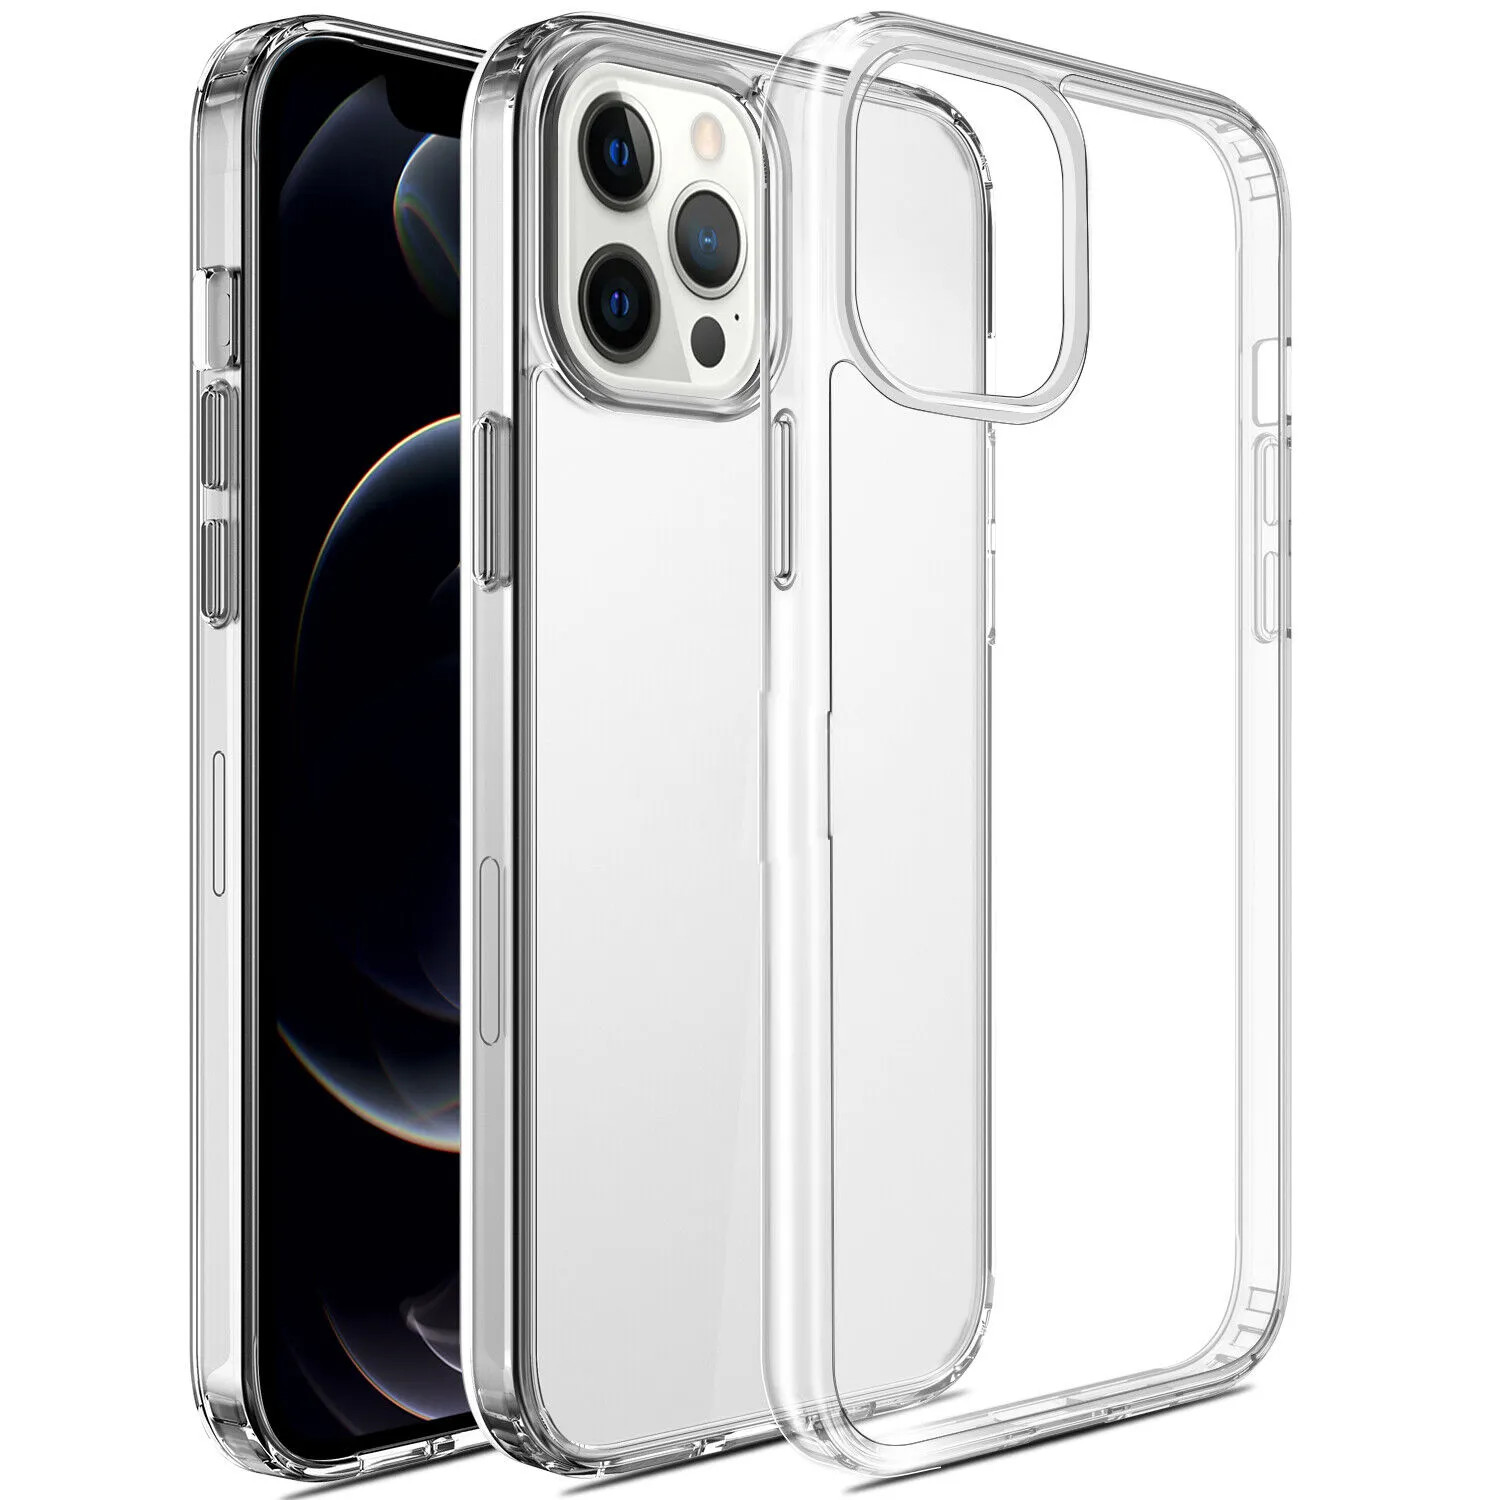 Ốp lưng chống sốc trong suốt cho iPhone 12 / 12 pro / 12 Pro Max hiệu X-Level Sparkling Series